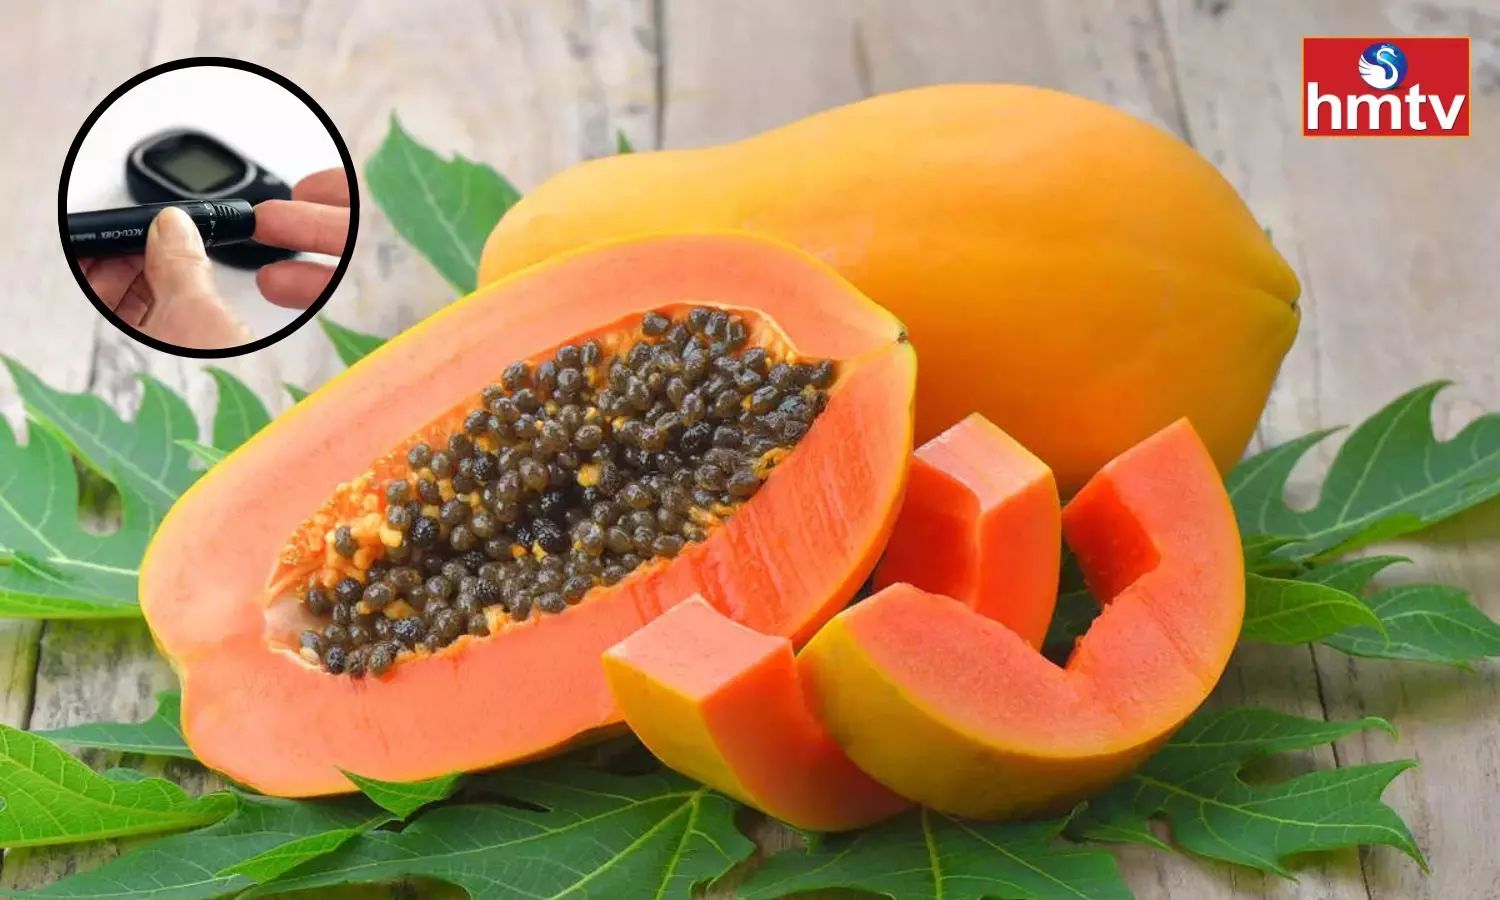 Papaya Seeds are a Miracle Medicine for Diabetic Patients Sugar is Under Control